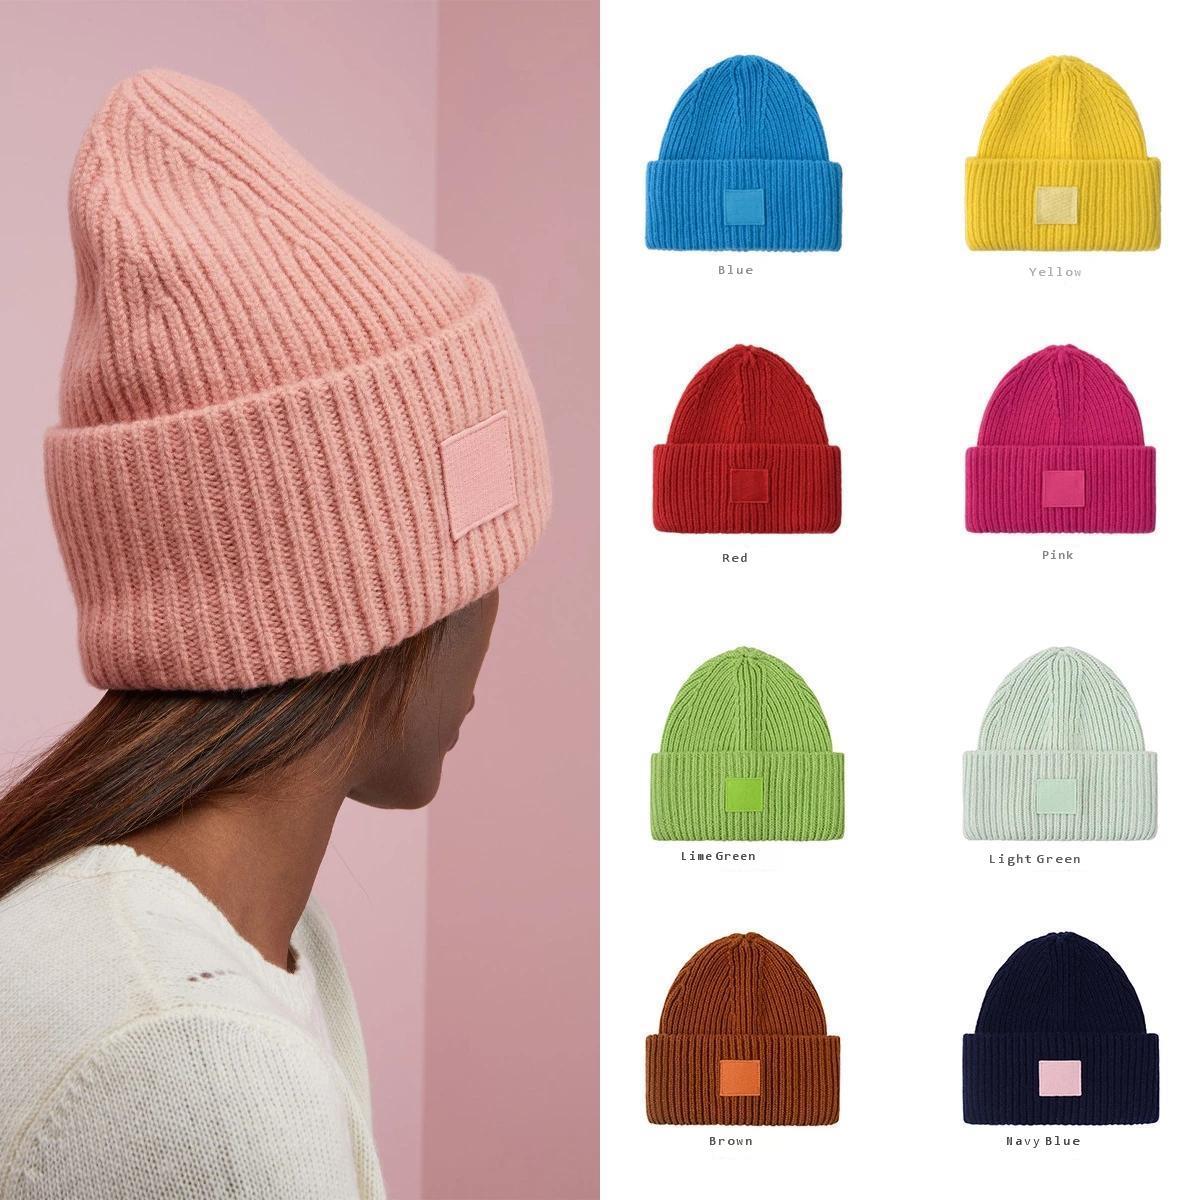 Verastore Winter Hats Solid Color Wool Knit Beanie Women Casual Hat Warm Female Soft Thicken Hedging Cap Slouchy Bonnet Many colors